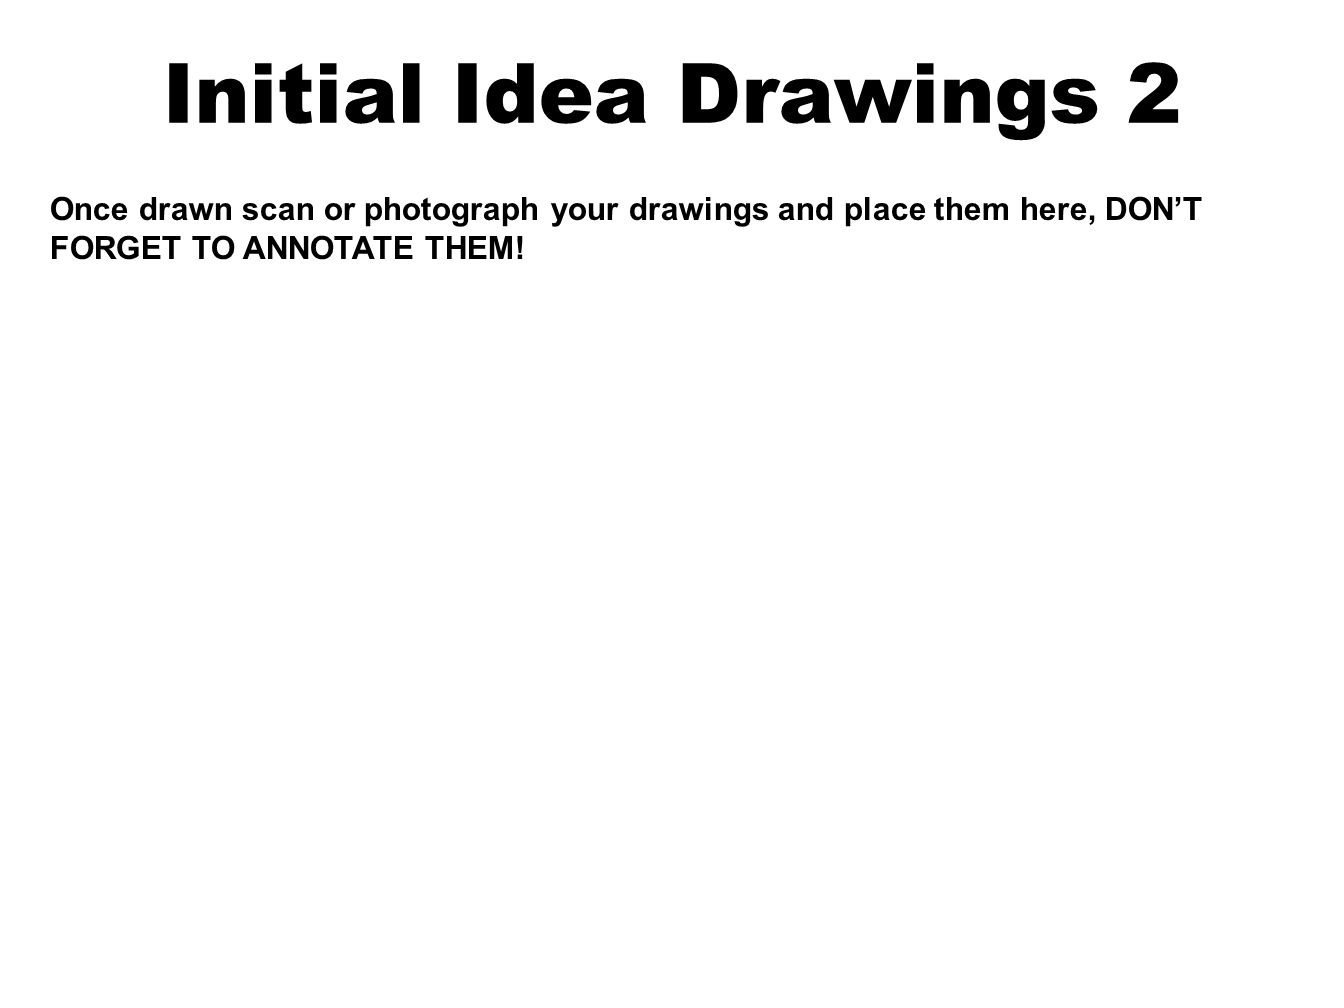 Initial Idea Drawings 2 Once drawn scan or photograph your drawings and place them here, DON’T FORGET TO ANNOTATE THEM!